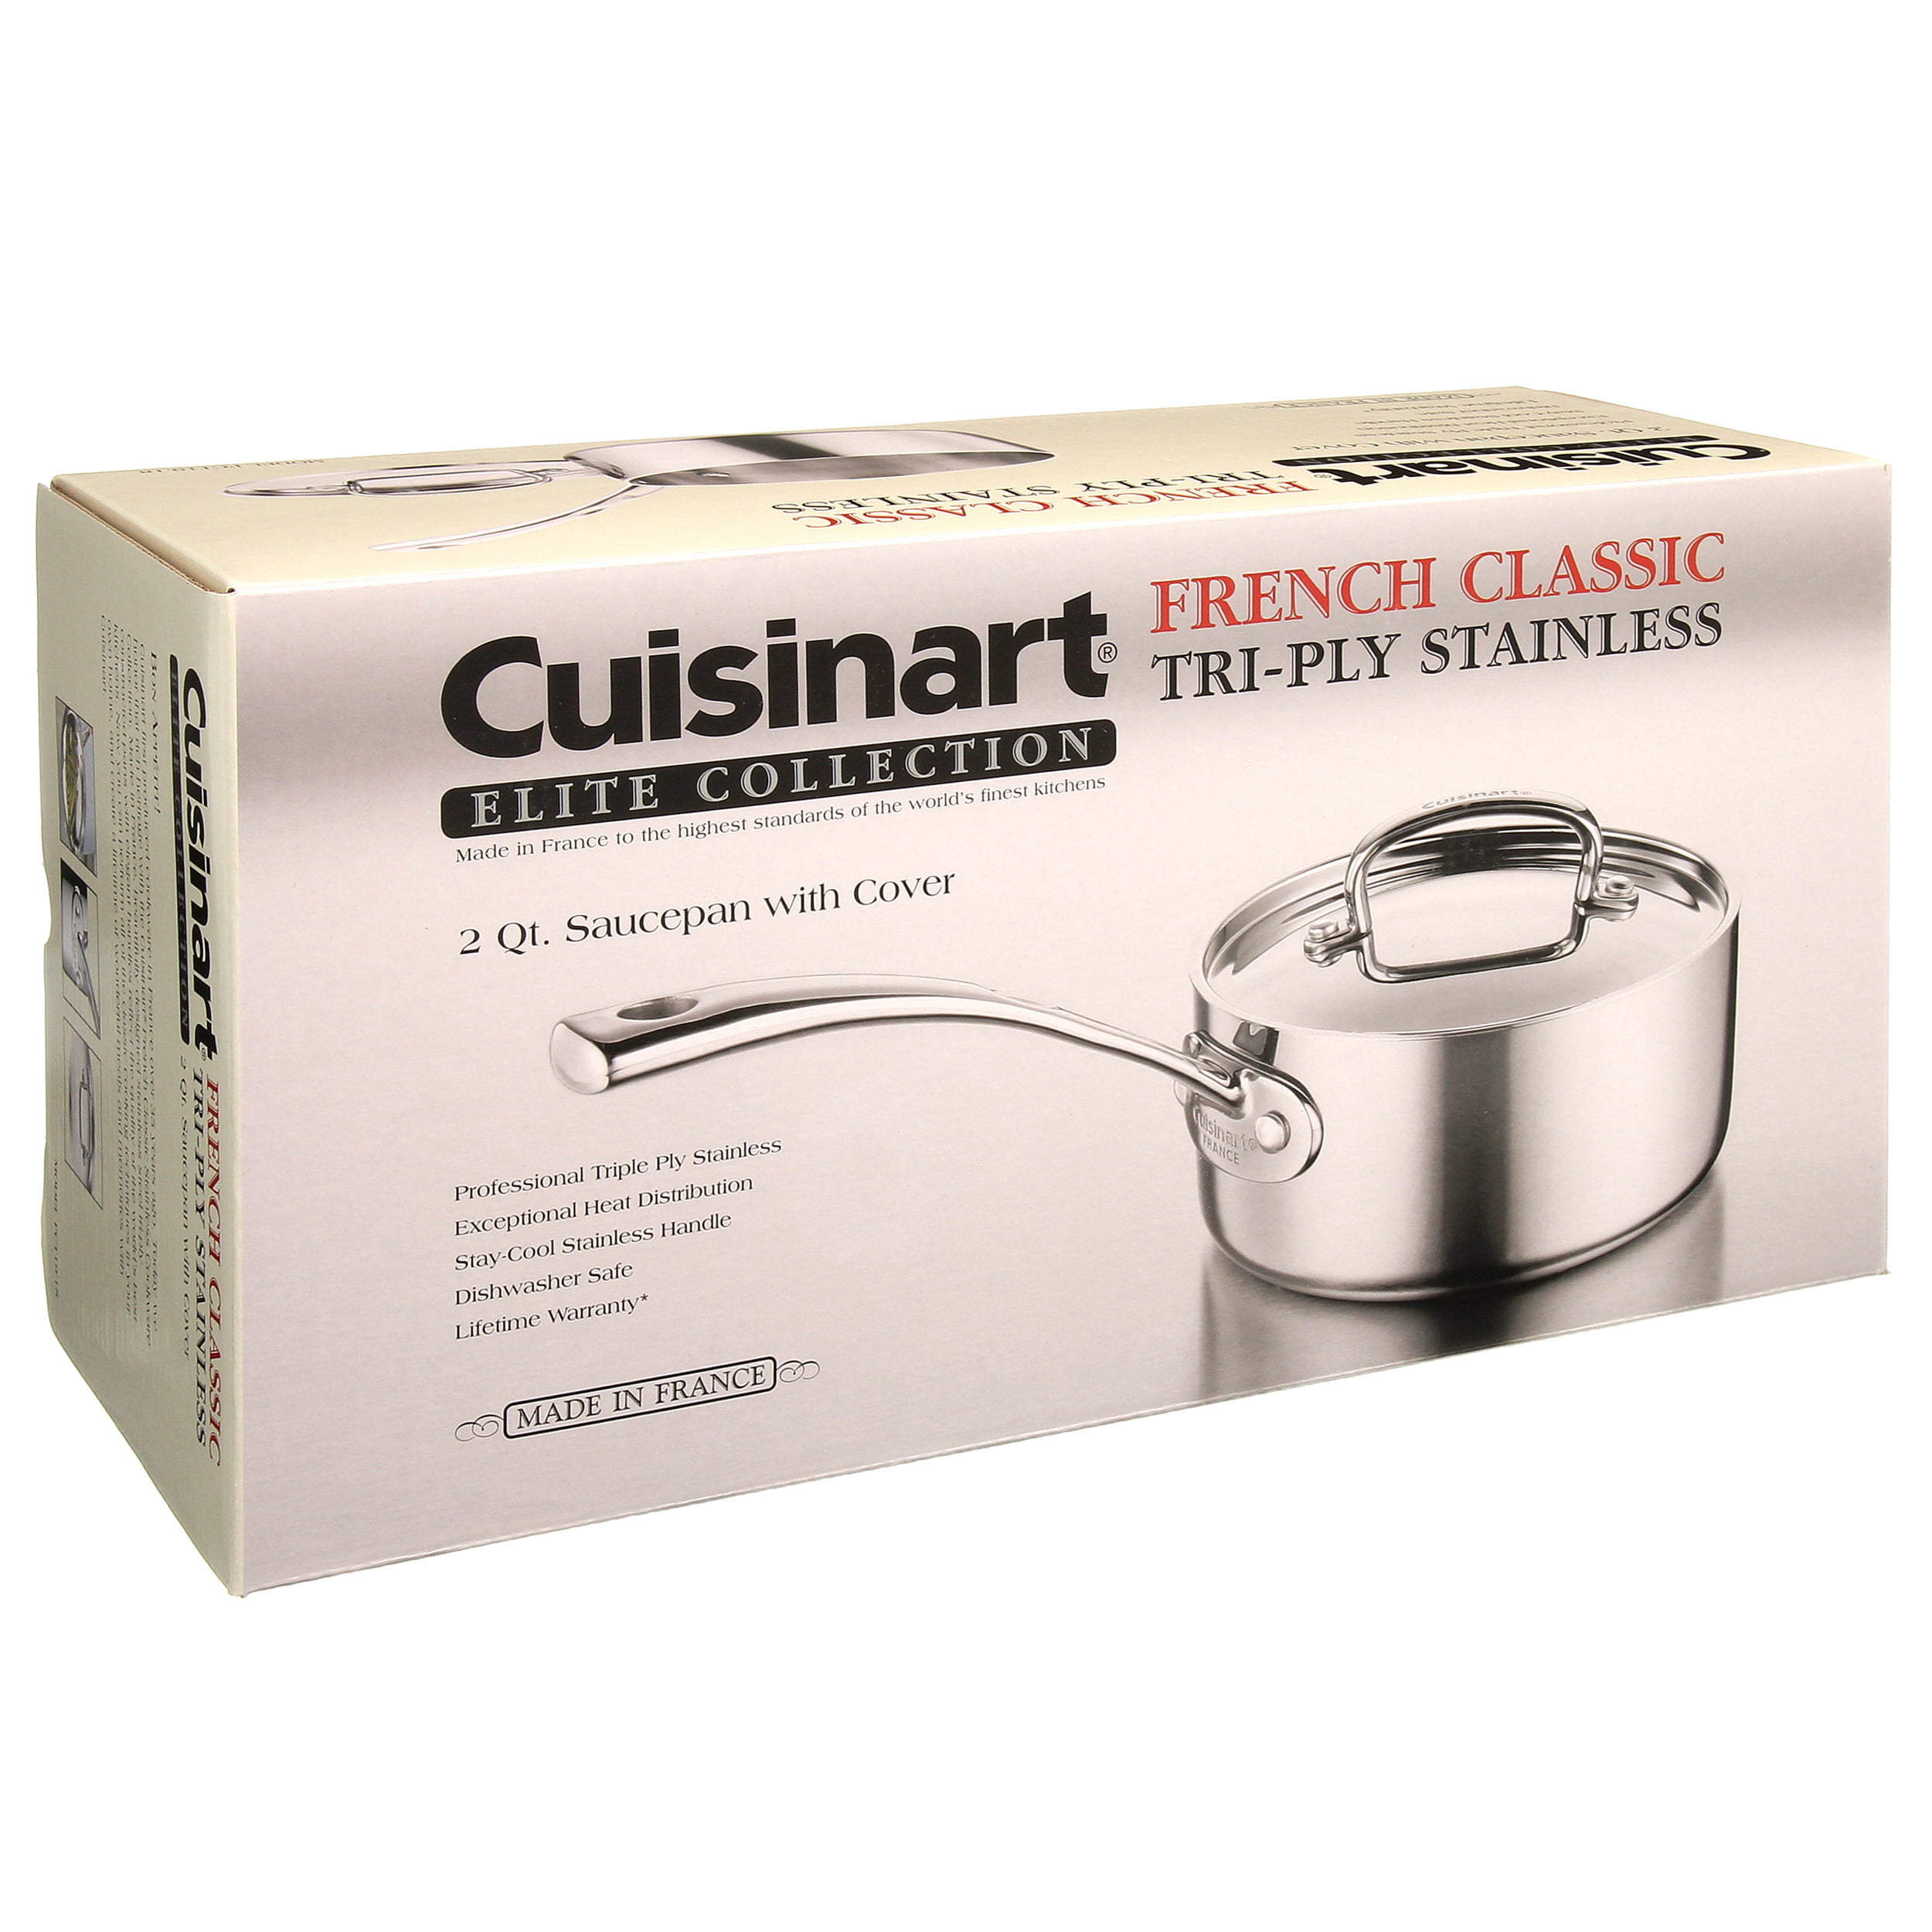 Cuisinart French Classic Tri-Ply Stainless 2 Quart Saucepan with Cover 